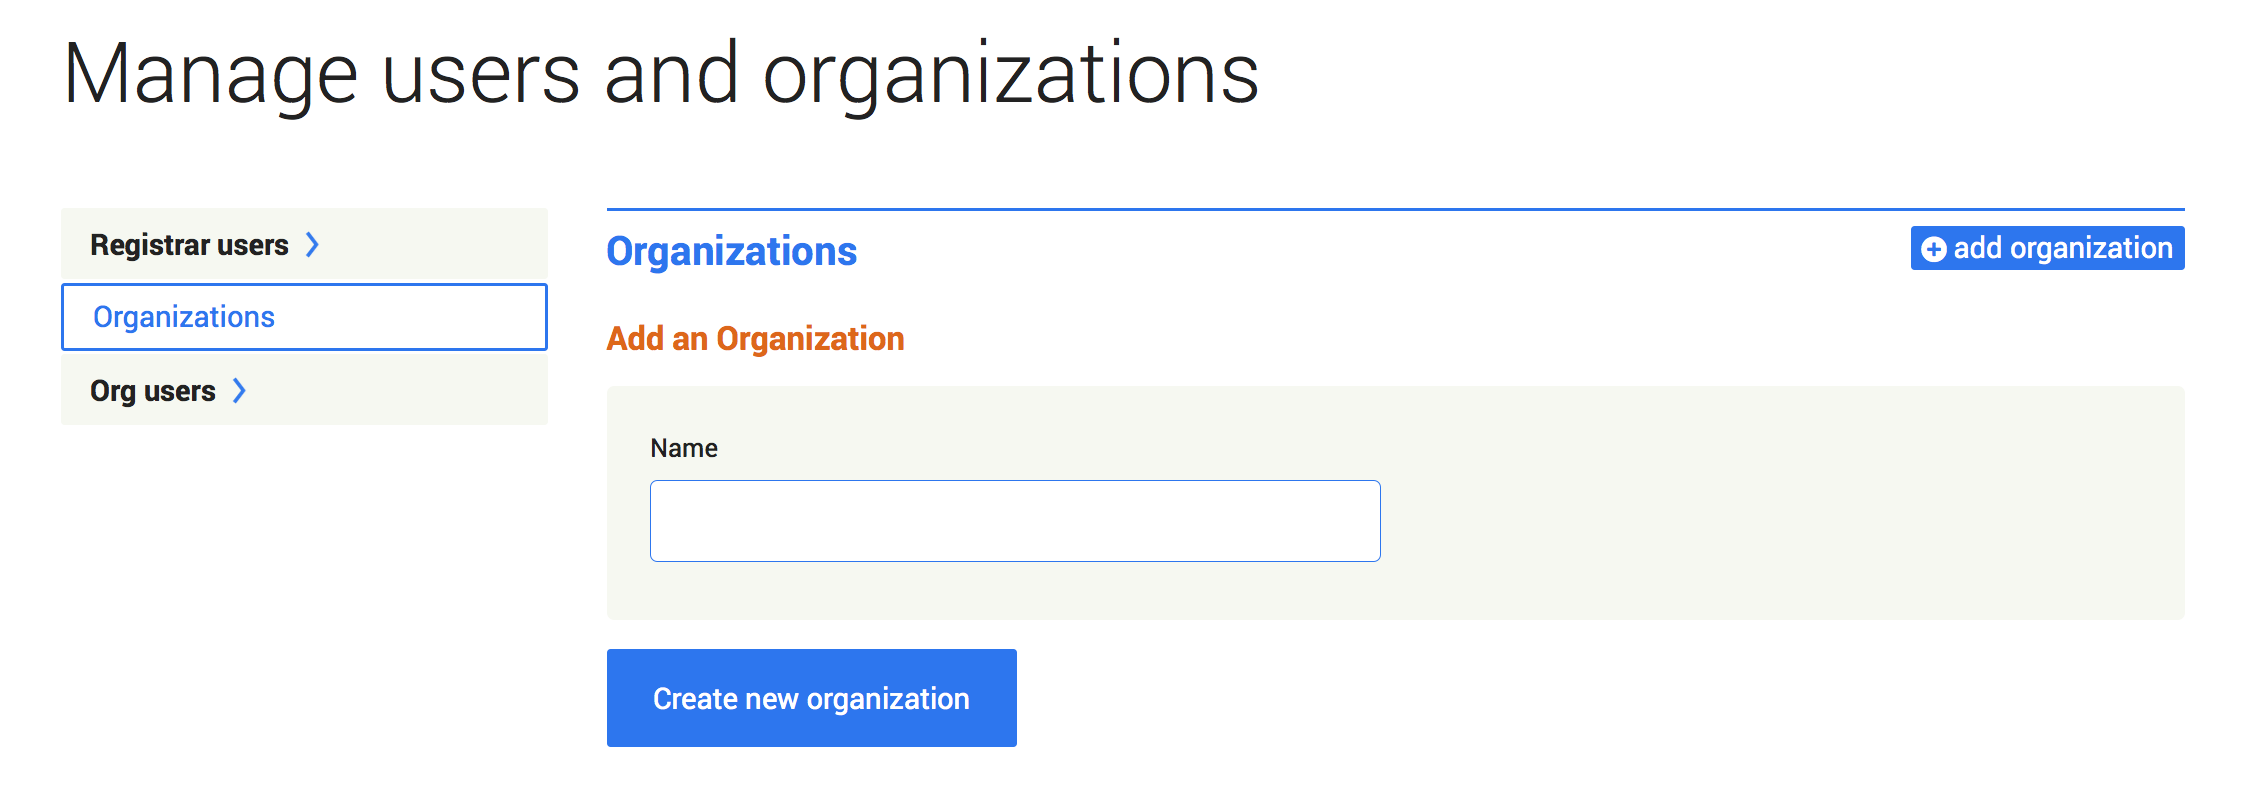 Screenshot of the Manage Organizations page. The 'add new organization' button appears to the right of the 'Organizations' heading. It causes a form to appear directly beneath the heading and button, above the other contents of the page.